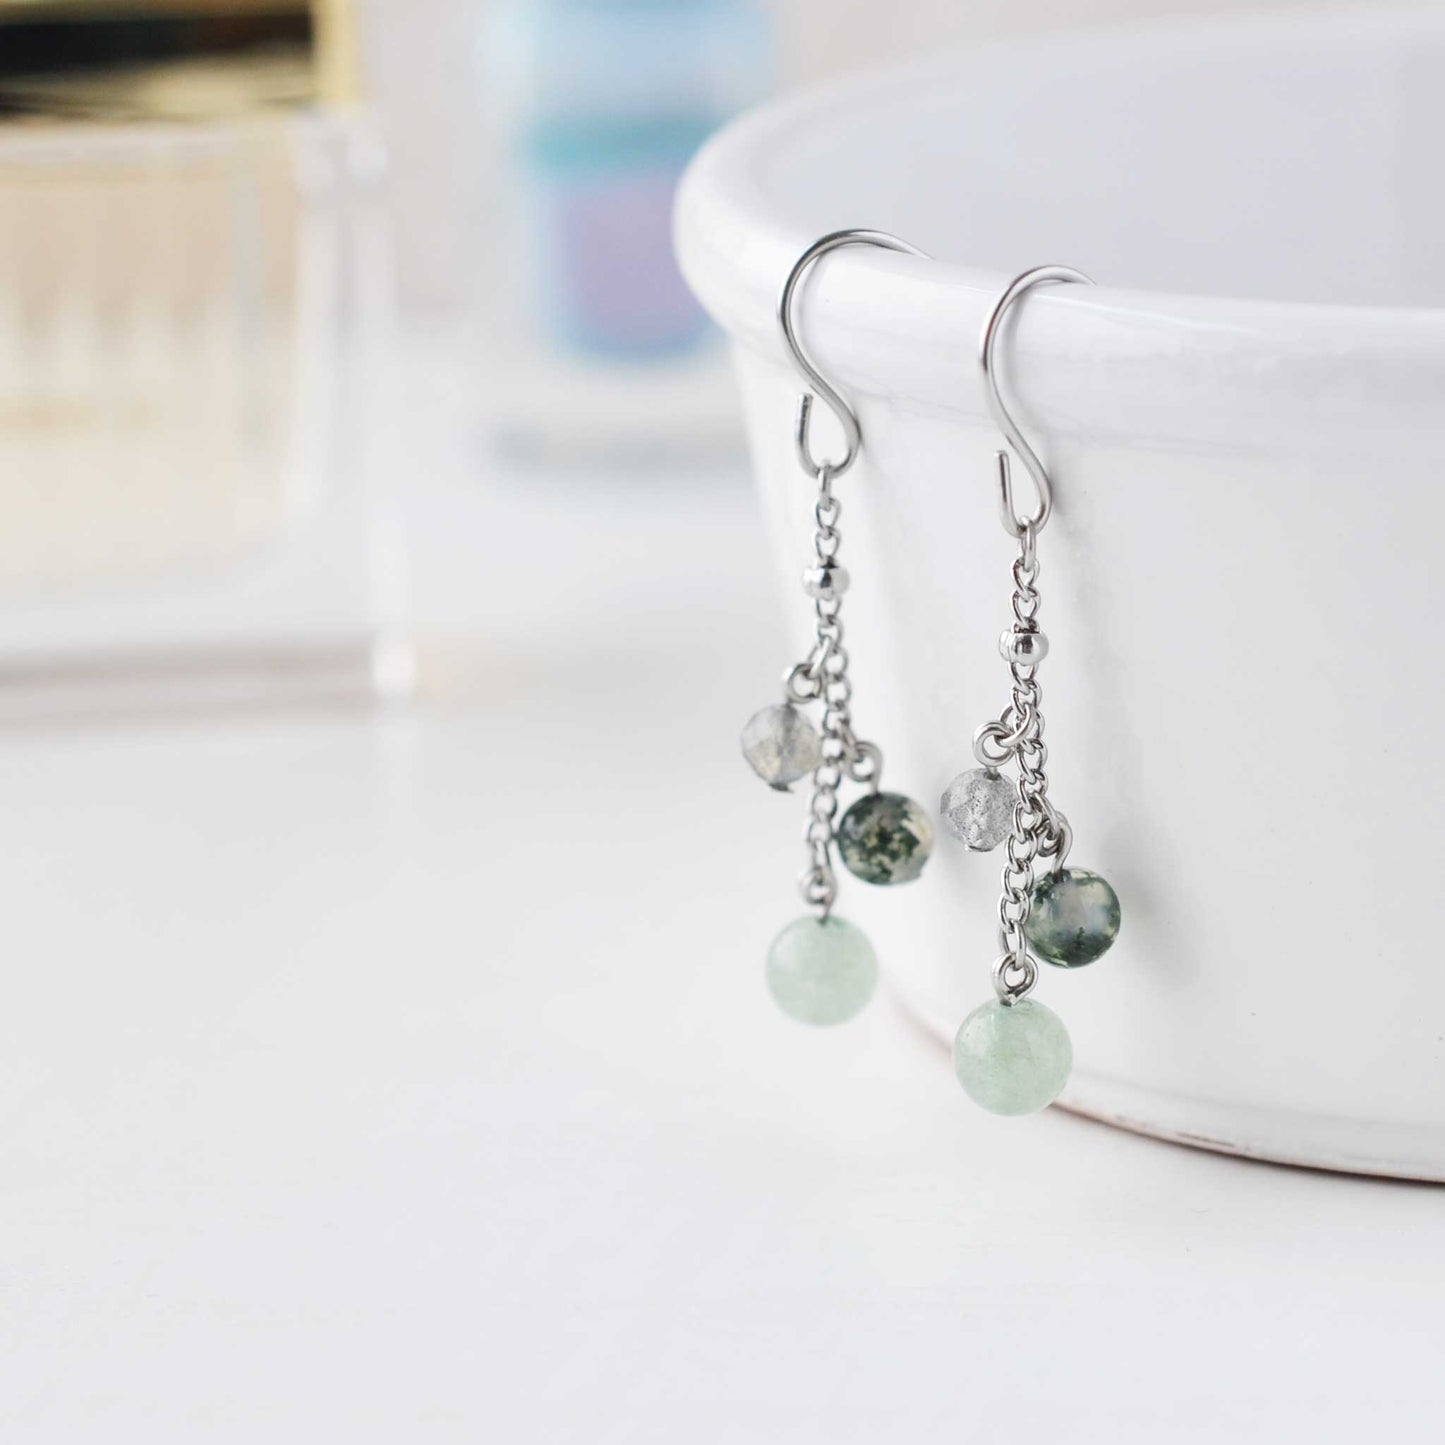 Green gemstone drop earrings hanging froma white cup against soft focus background